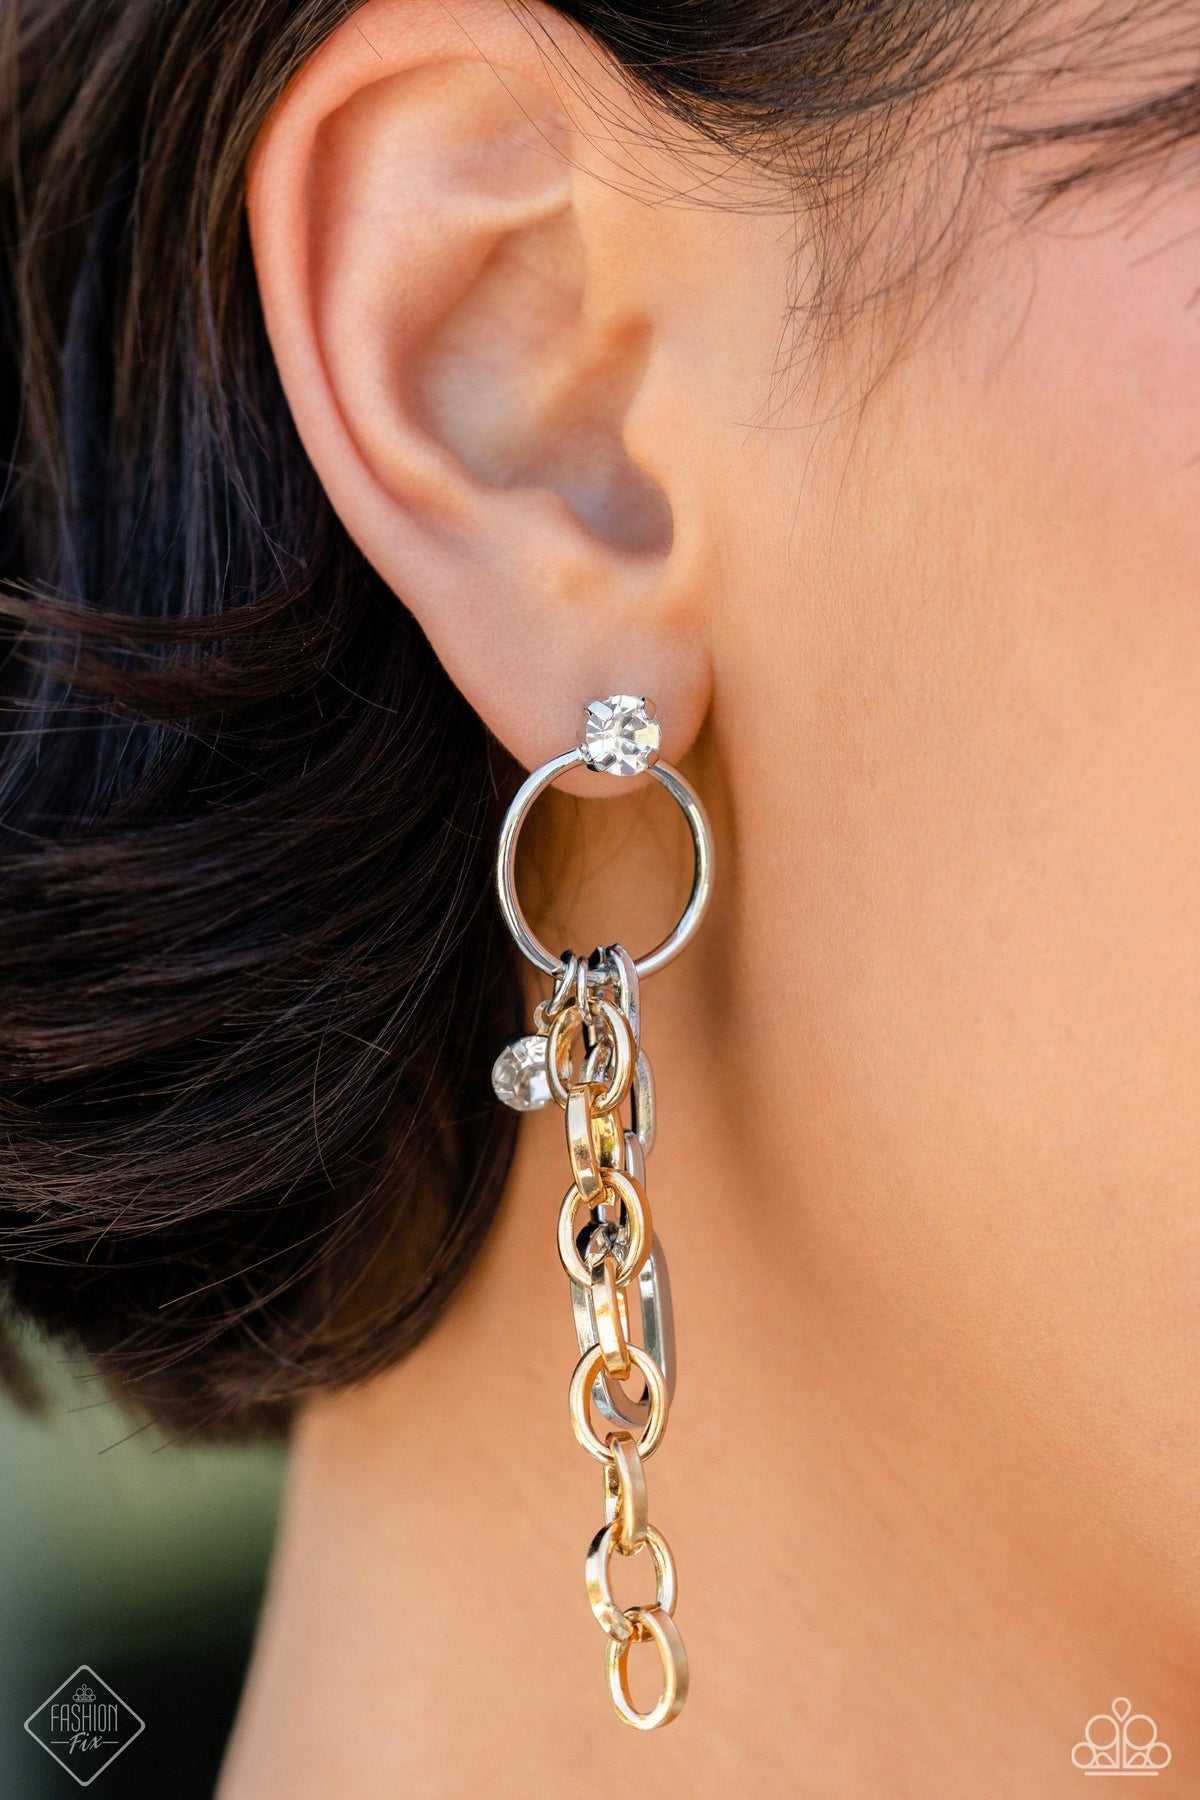 Two-Tone Trendsetter Multi Gold &amp; Silver Earrings - Paparazzi Accessories-on model - CarasShop.com - $5 Jewelry by Cara Jewels